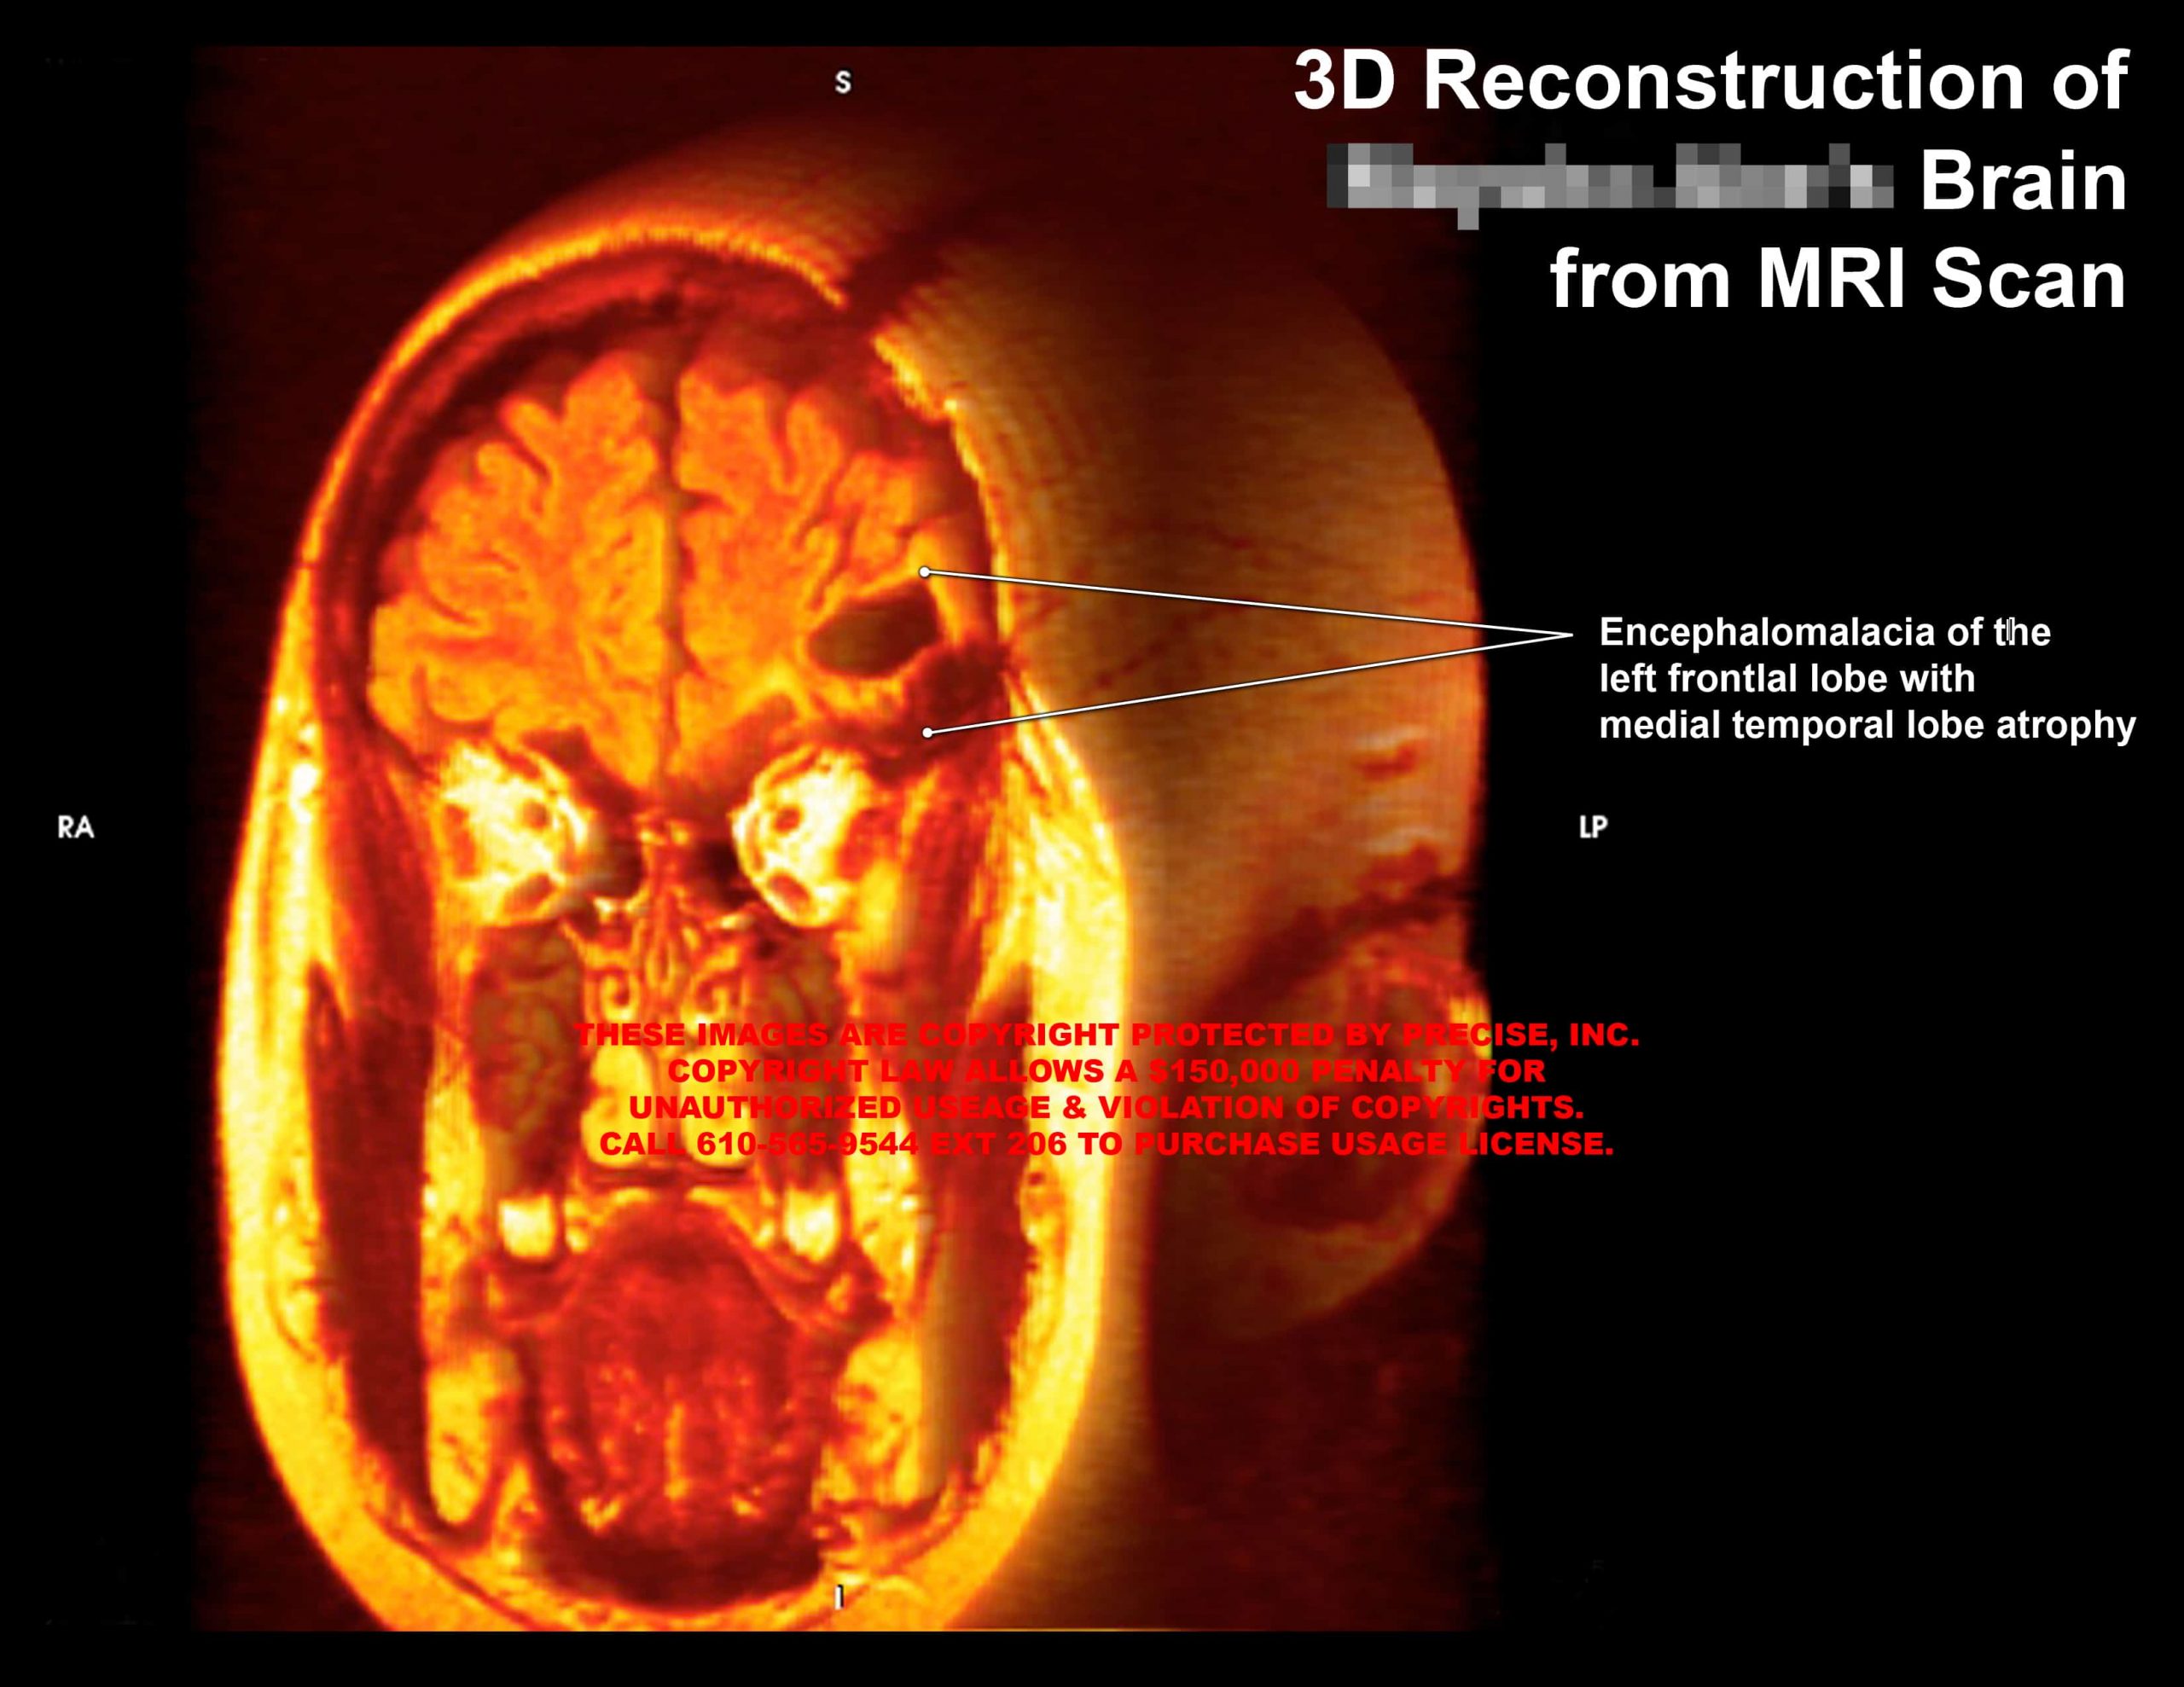 3D Reconstruction of Brain from MRI Scan